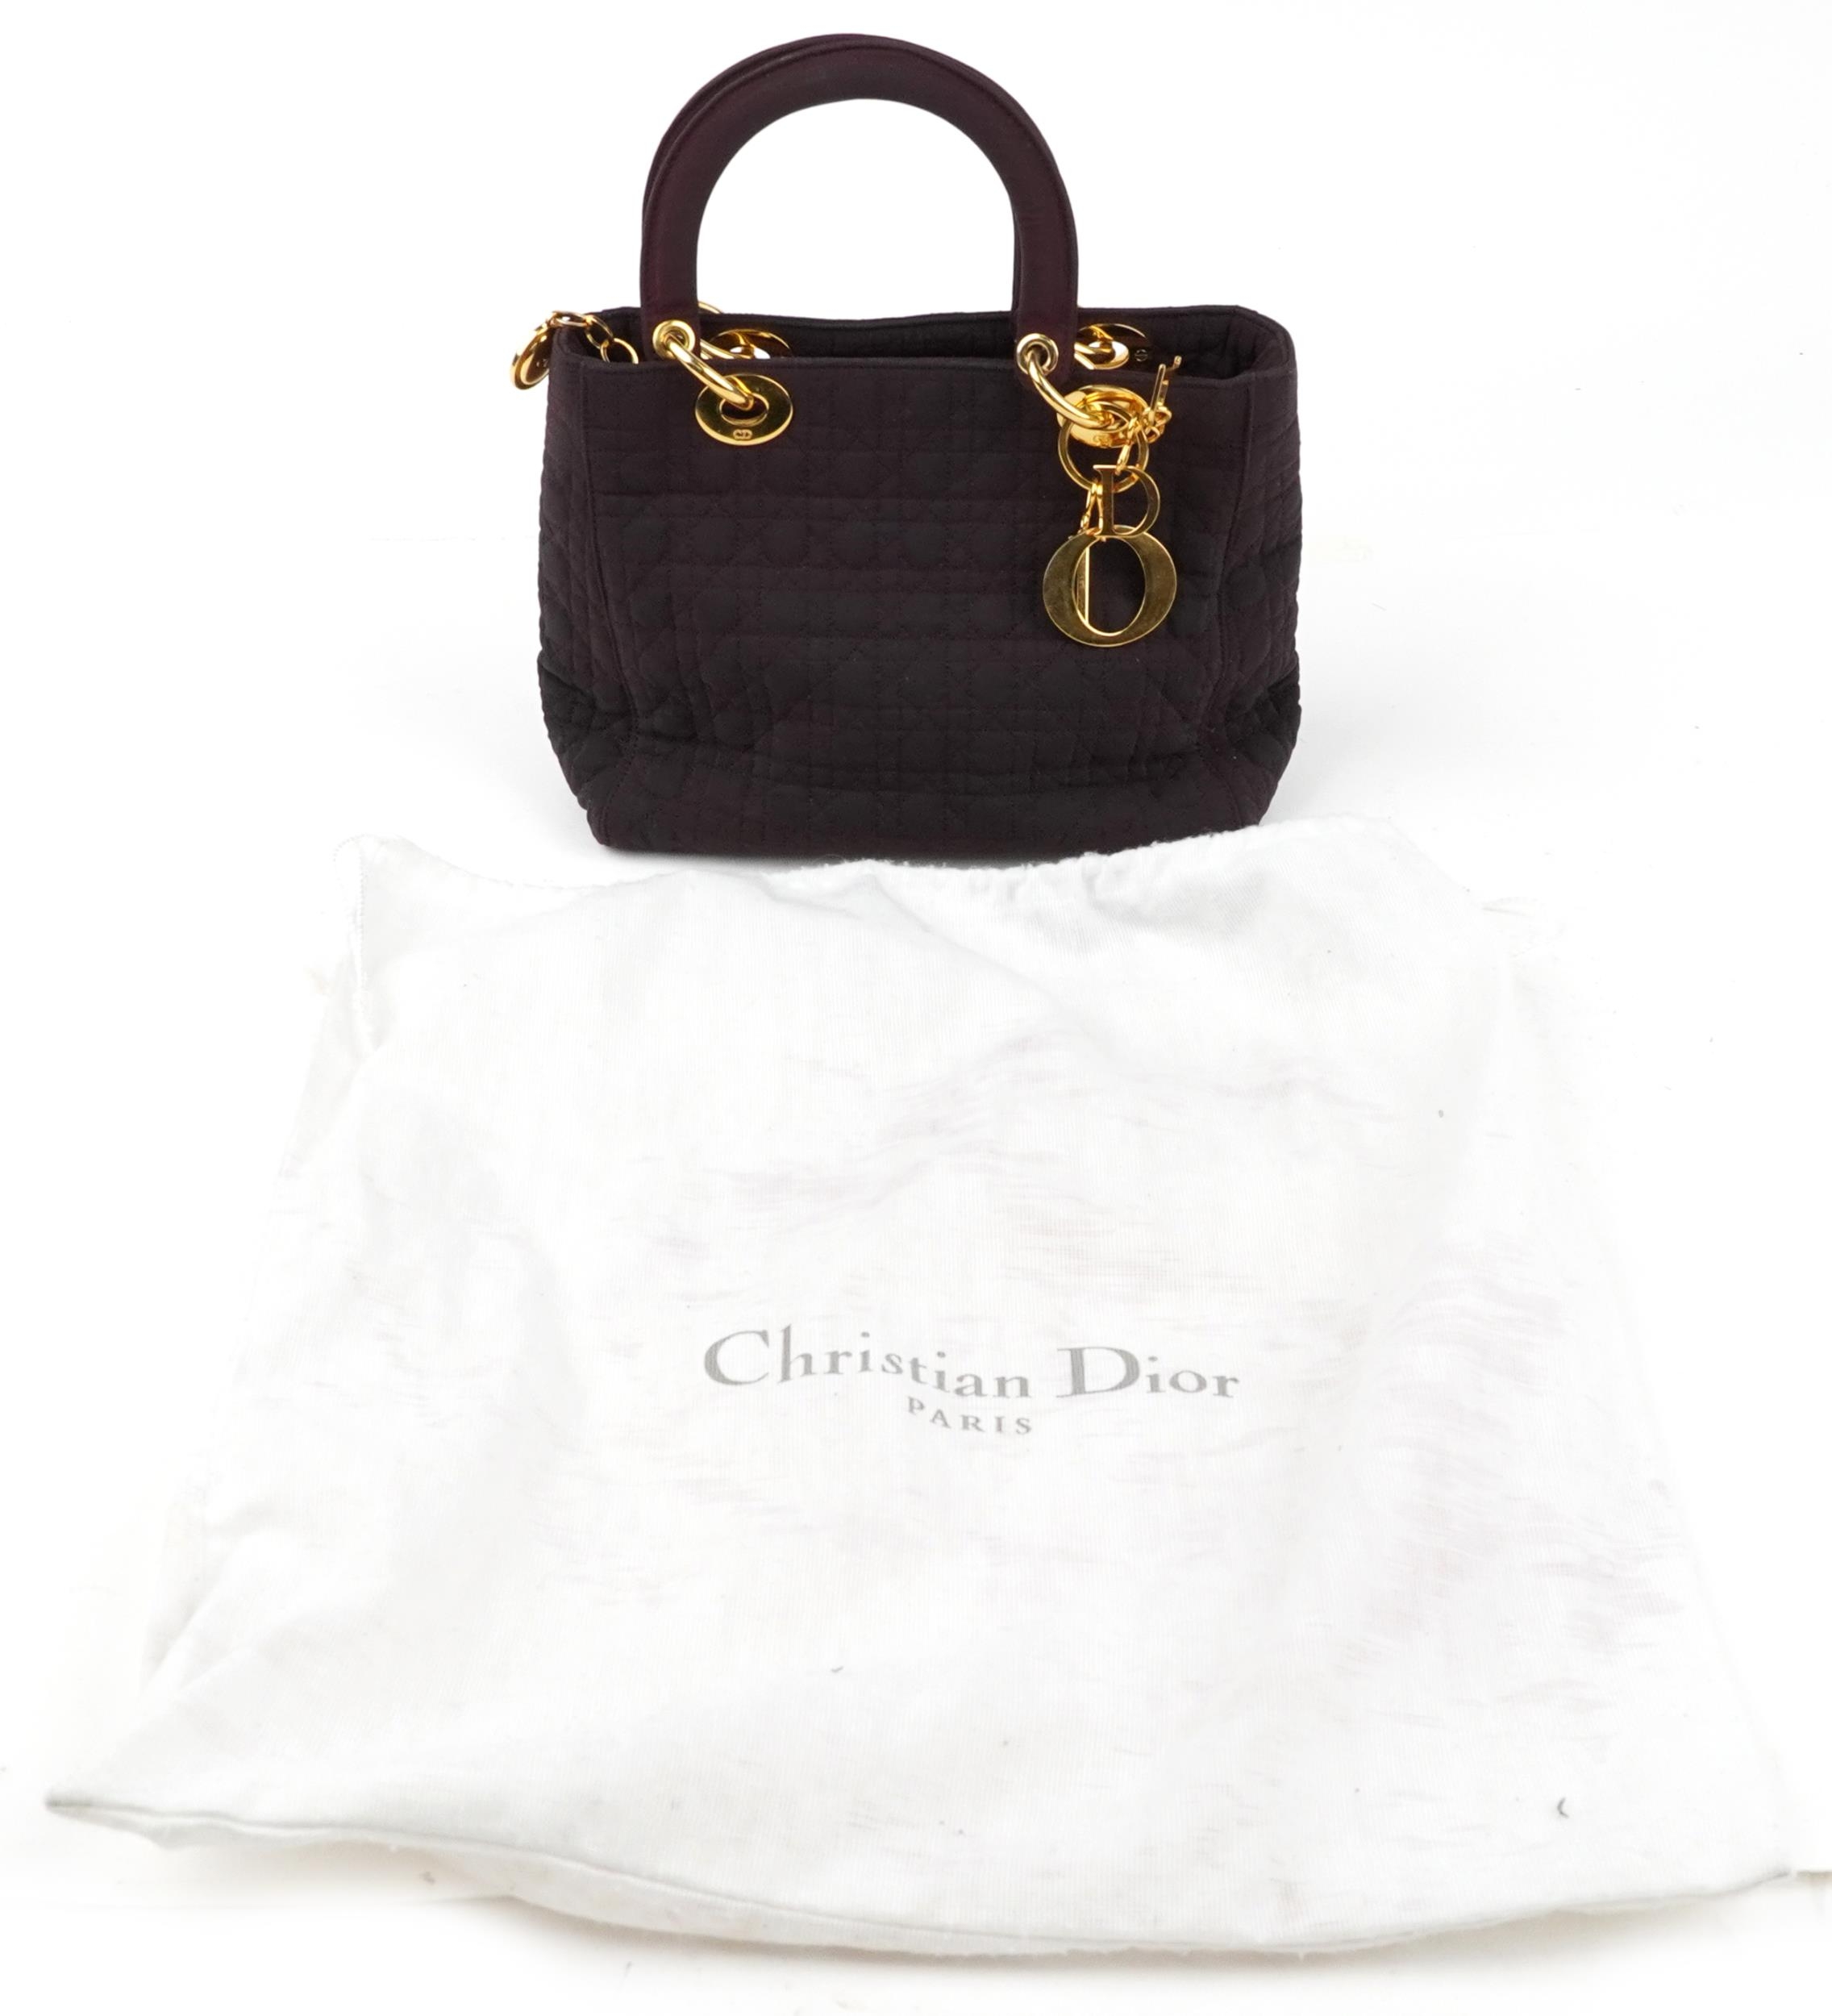 Christian Dior Cannage handbag with dust bag, 26cm wide - Image 2 of 4